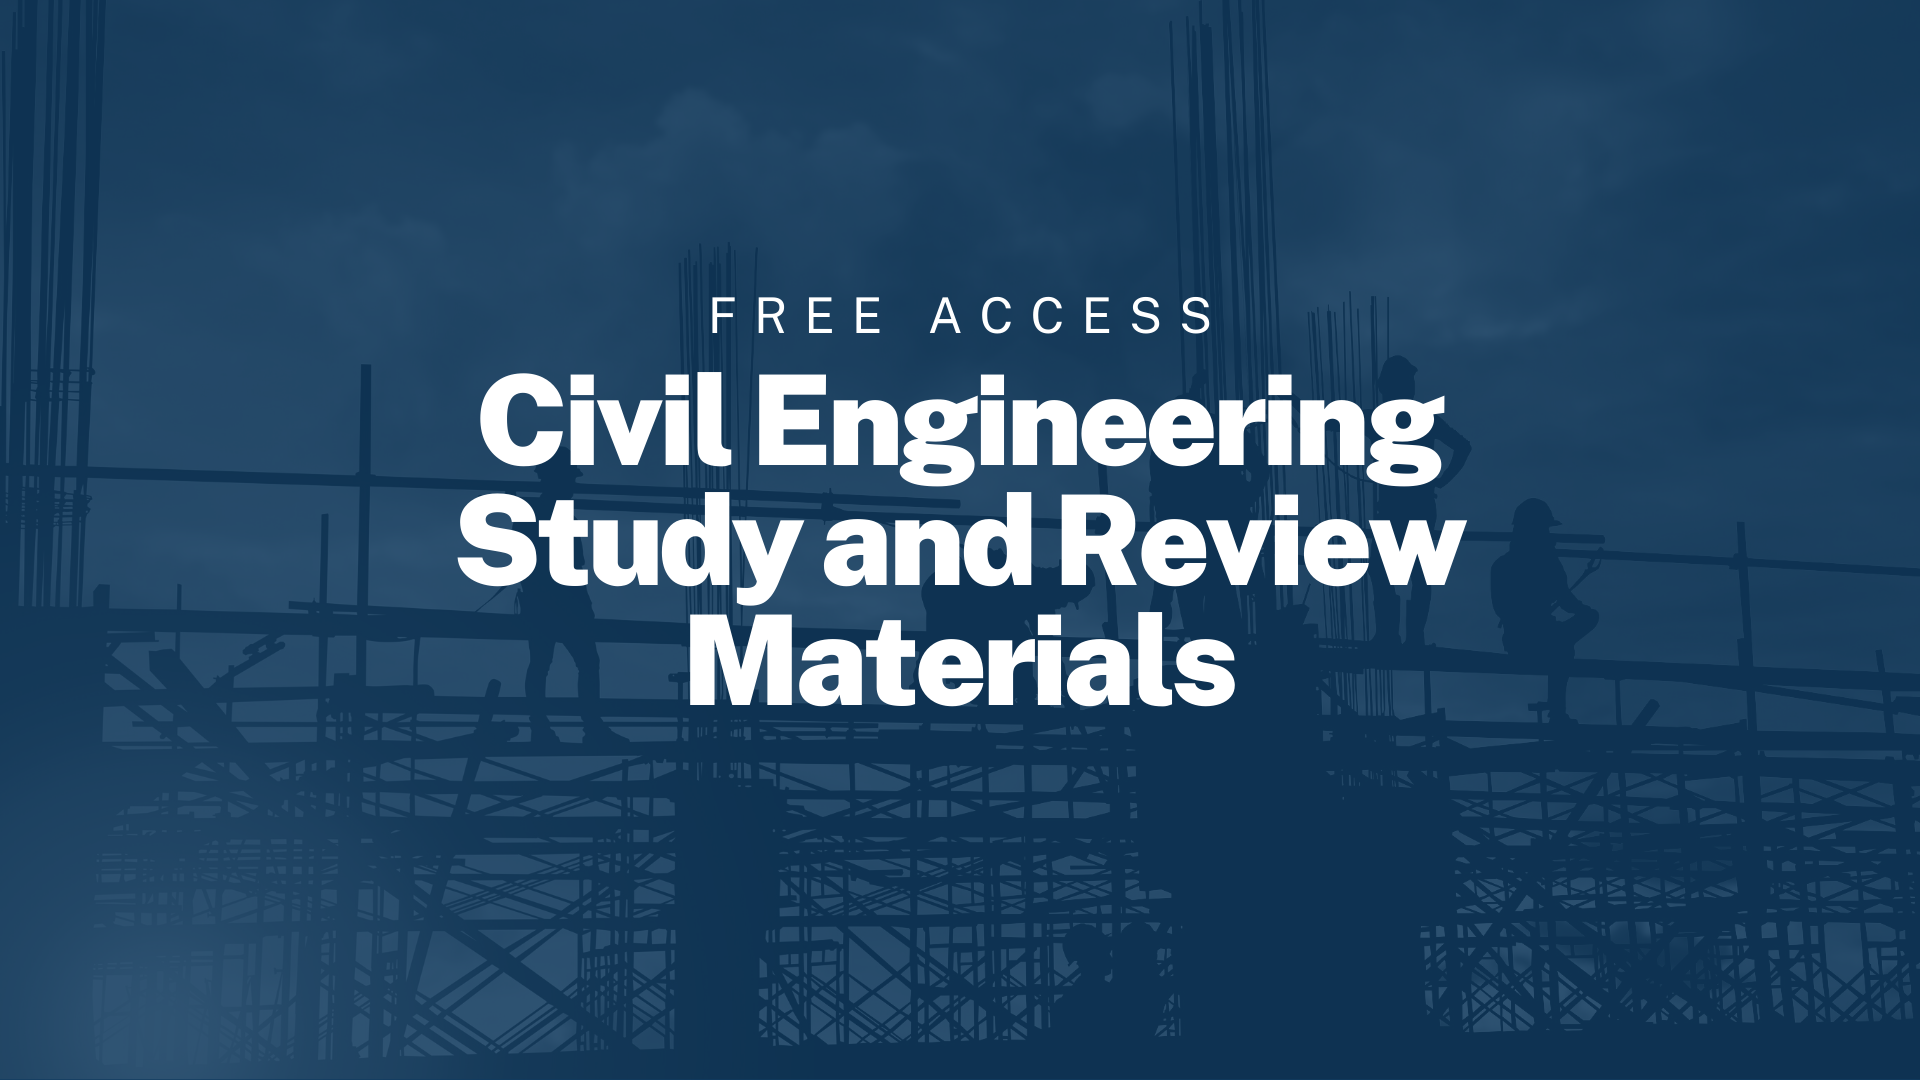 FREE ACCESS: Civil Engineering Study and Review Materials